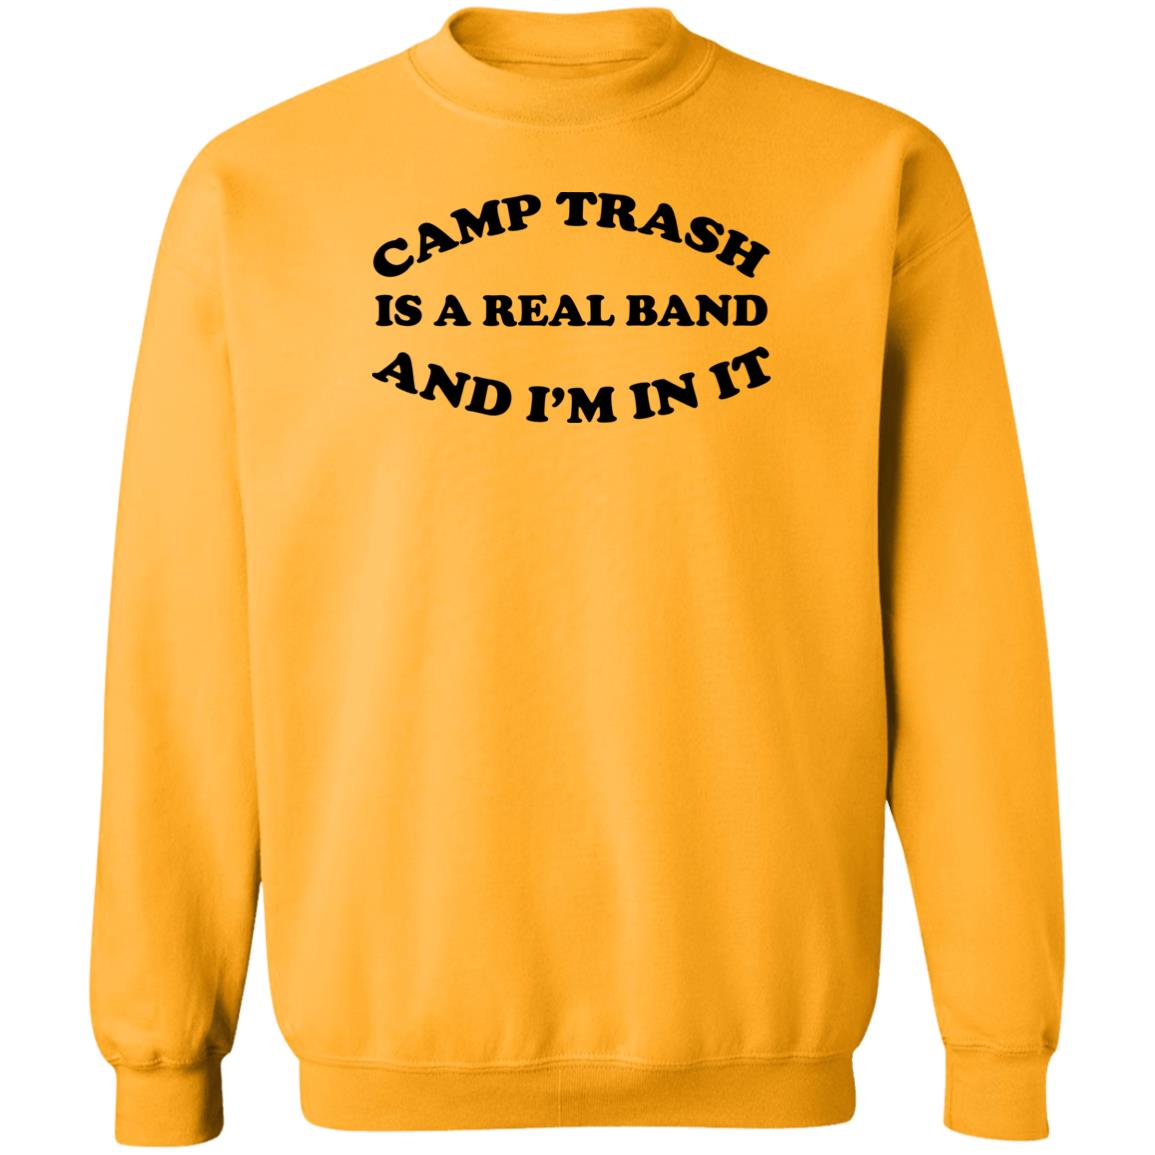 Camps Trash Band Store Camps Trash Is A Real Band And I’m In It Shirt